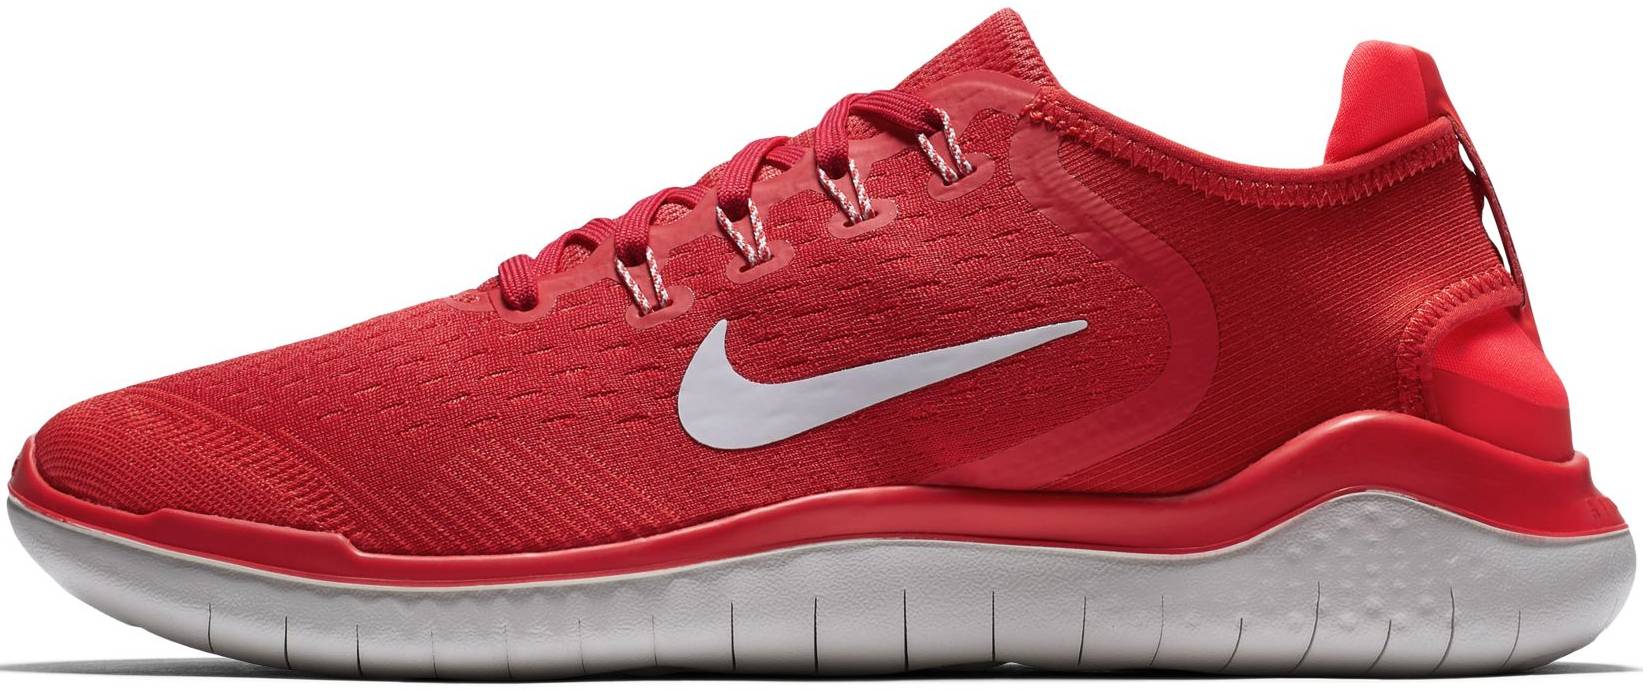 nike red and gray shoes